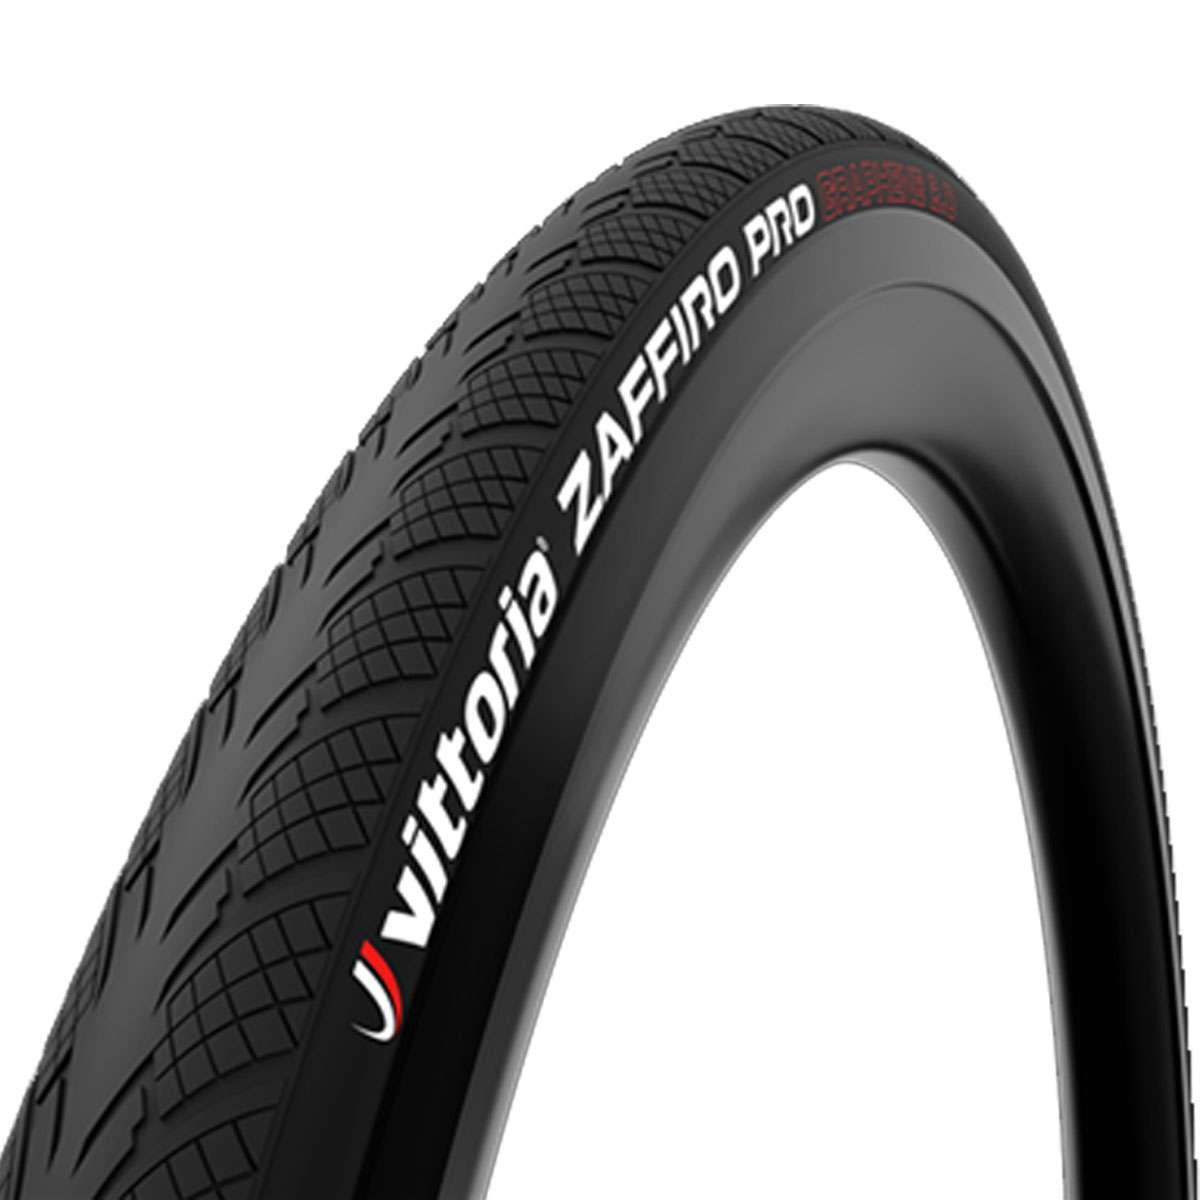 700x25C Raceguard New Bicycle Tire SCHWALBE  Durano 25-622 